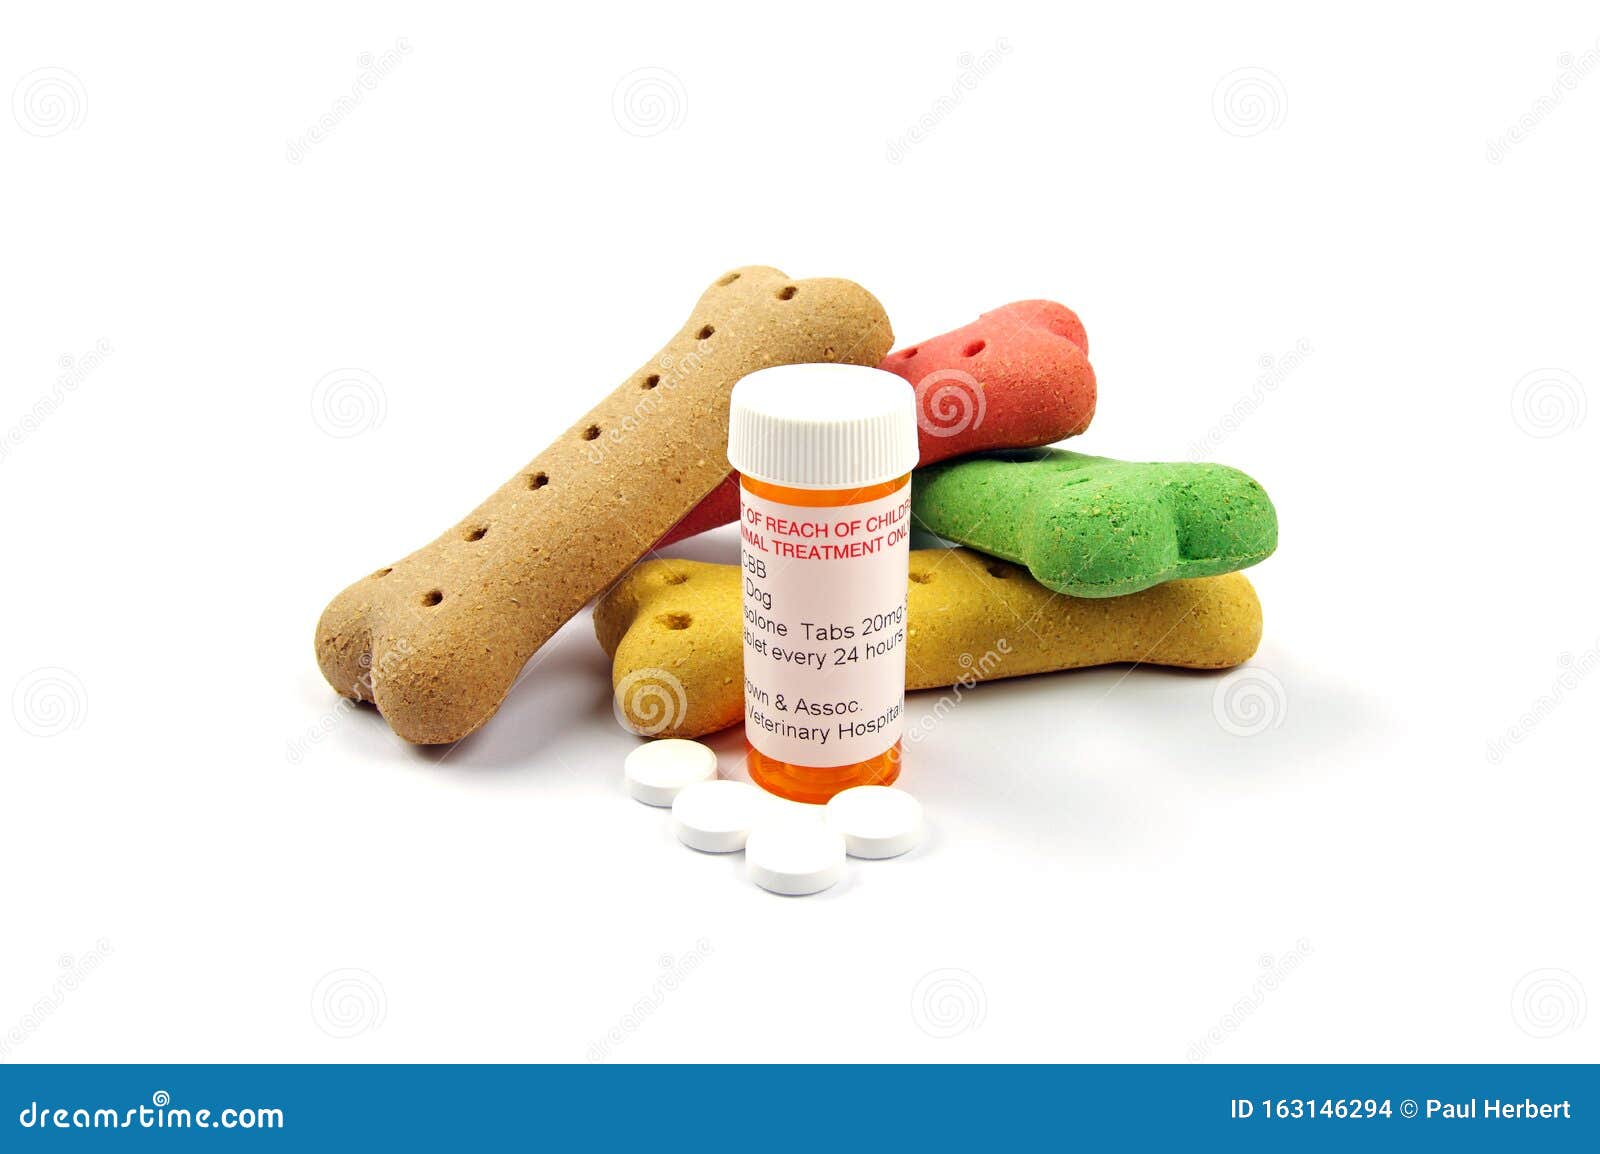 pet medication and pill container with colored dog bone treats